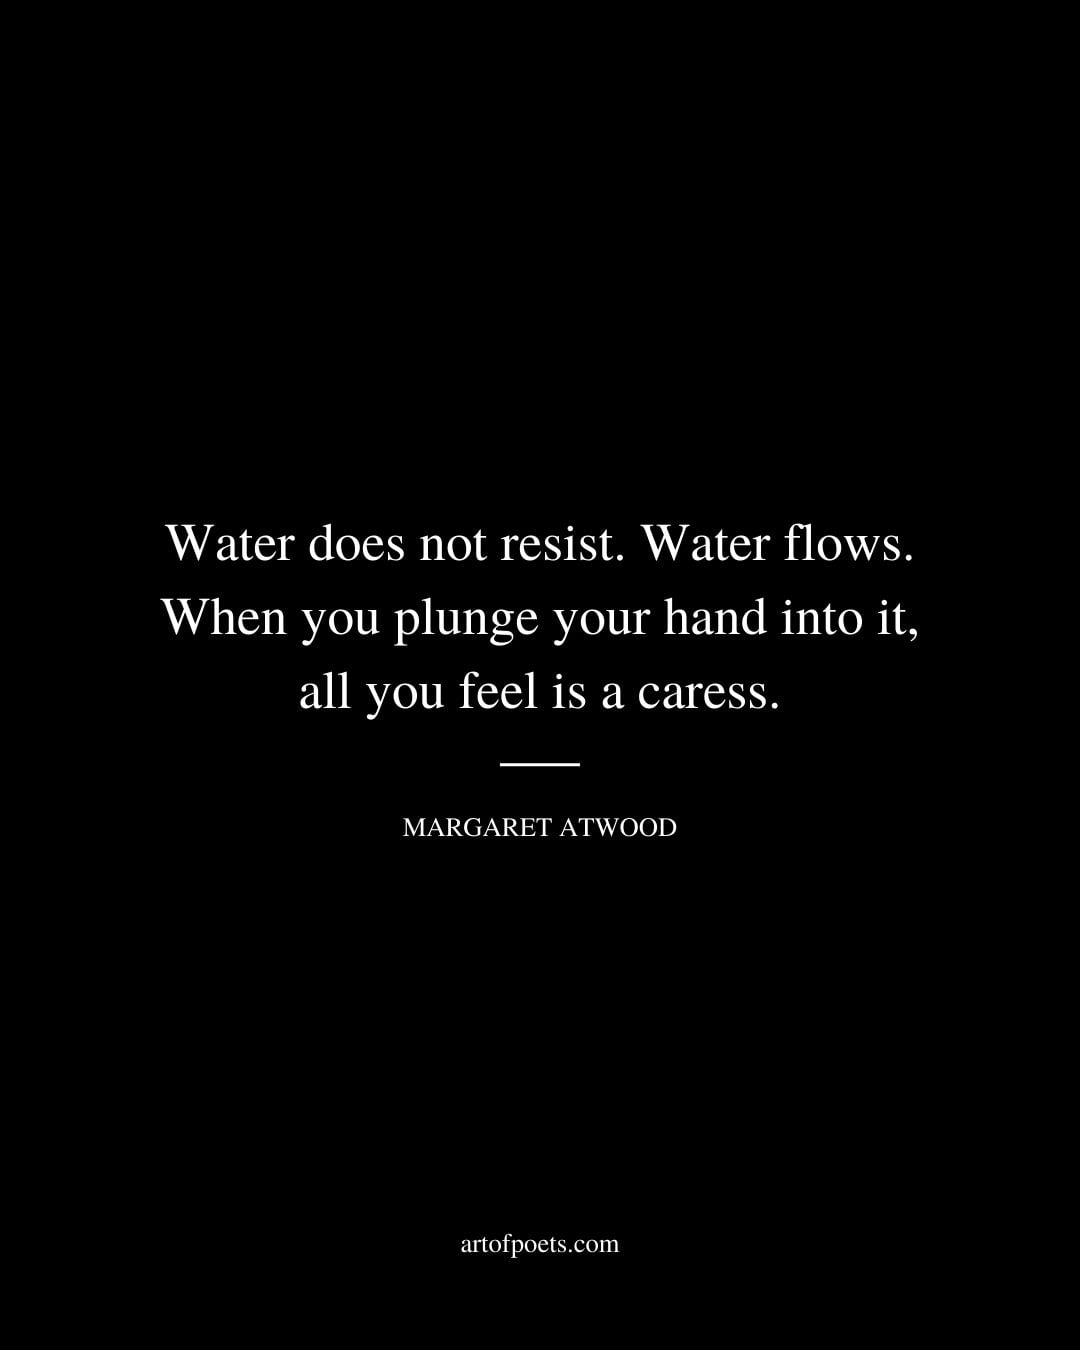 Water does not resist. Water flows. When you plunge your hand into it all you feel is a caress. Margaret Atwood